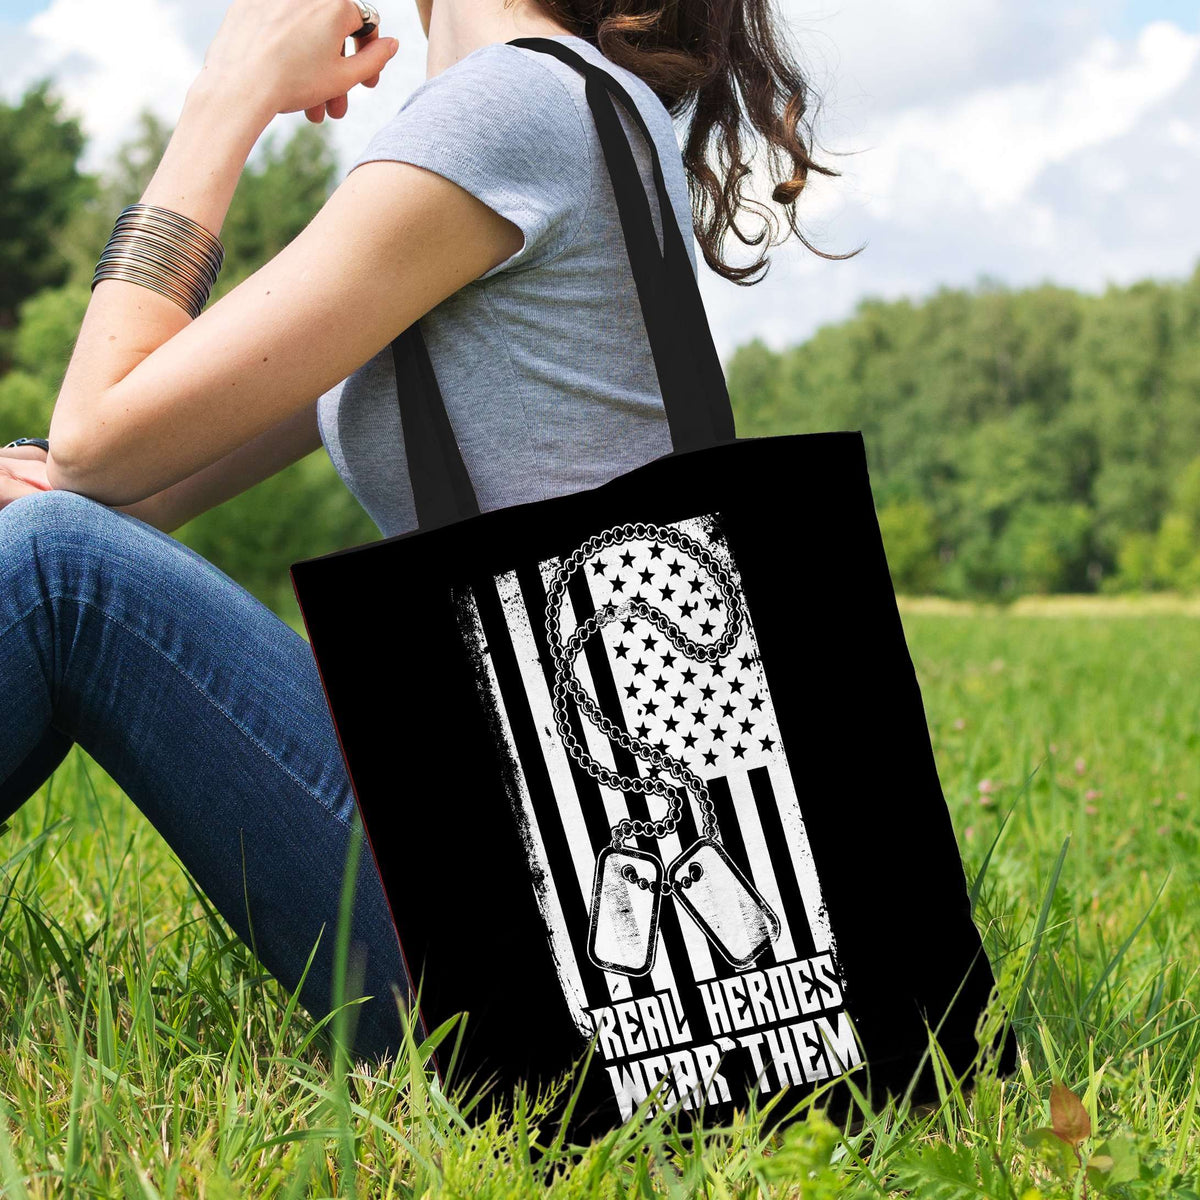 Designs by MyUtopia Shout Out:Real Heroes Wear Dog Tags Fabric Totebag Reusable Shopping Tote